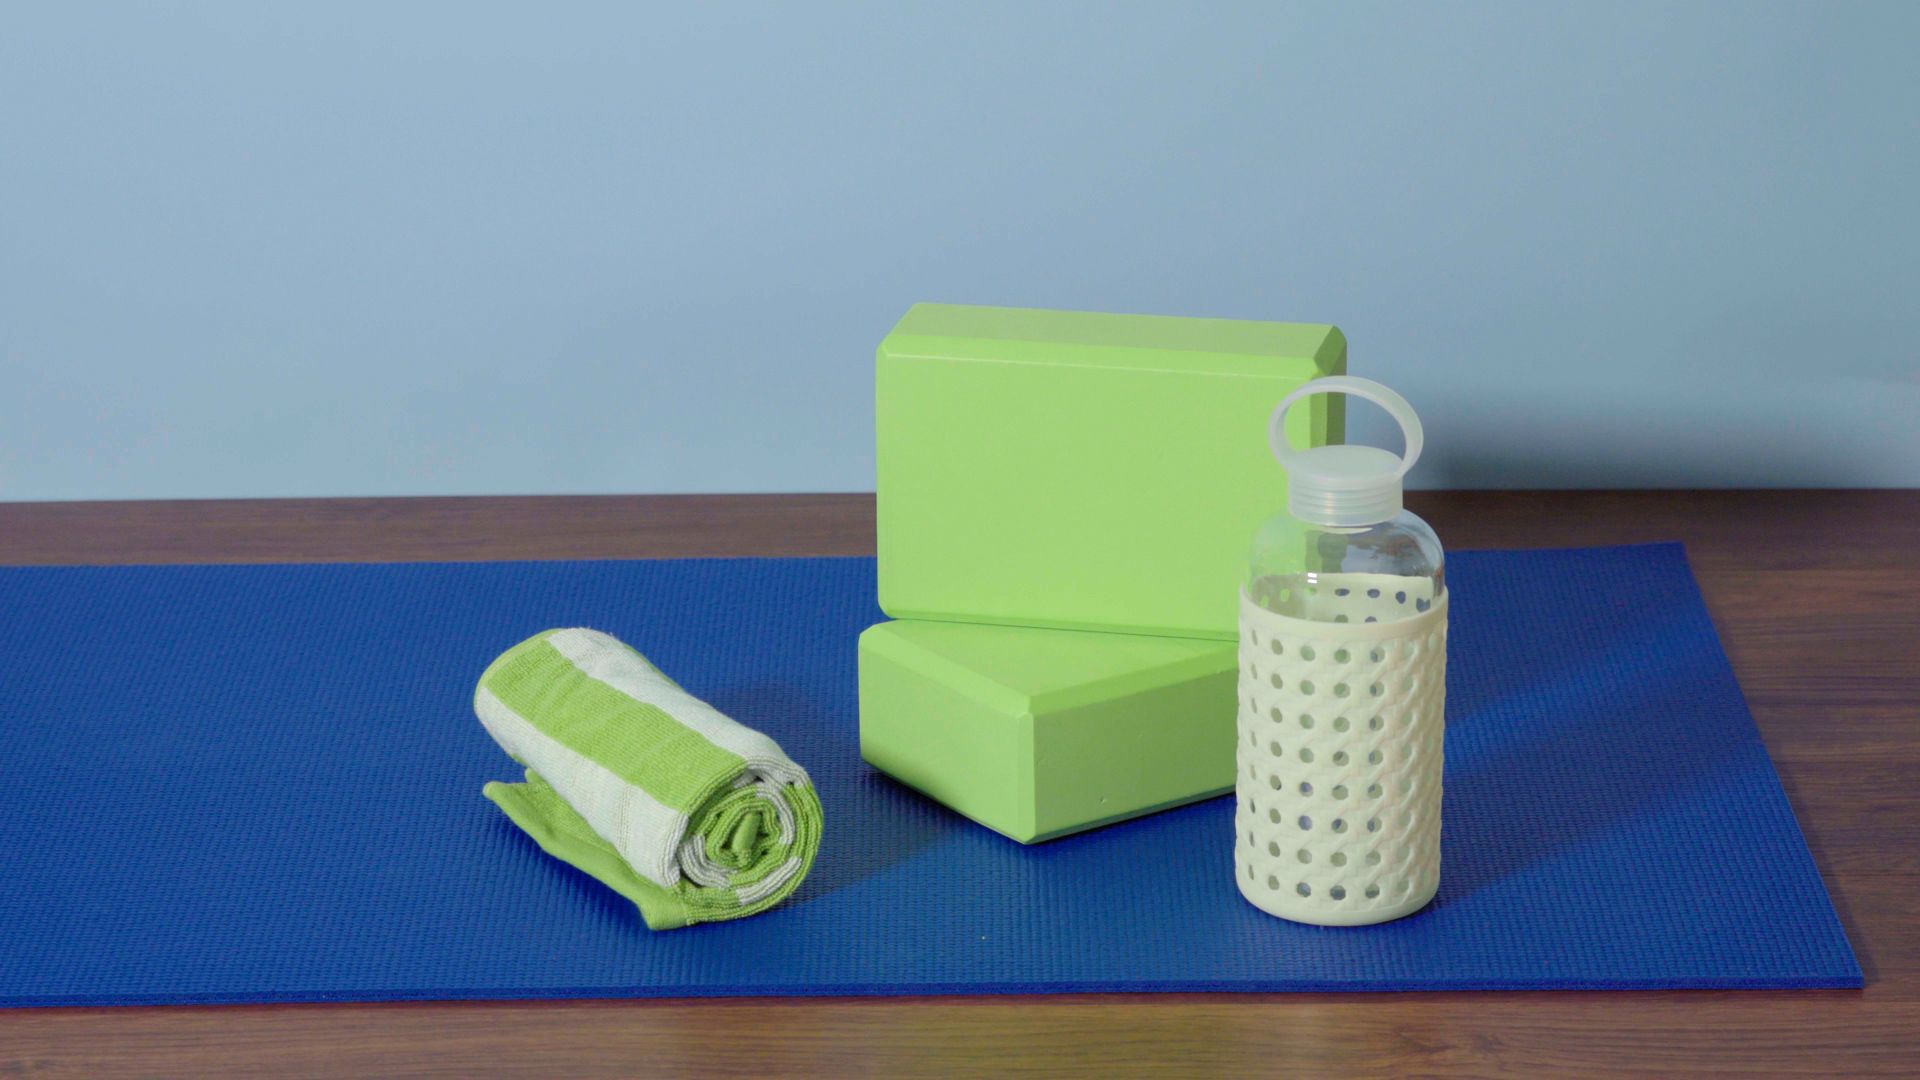 How to Clean a Yoga Mat (Because You May Not Do It Enough)